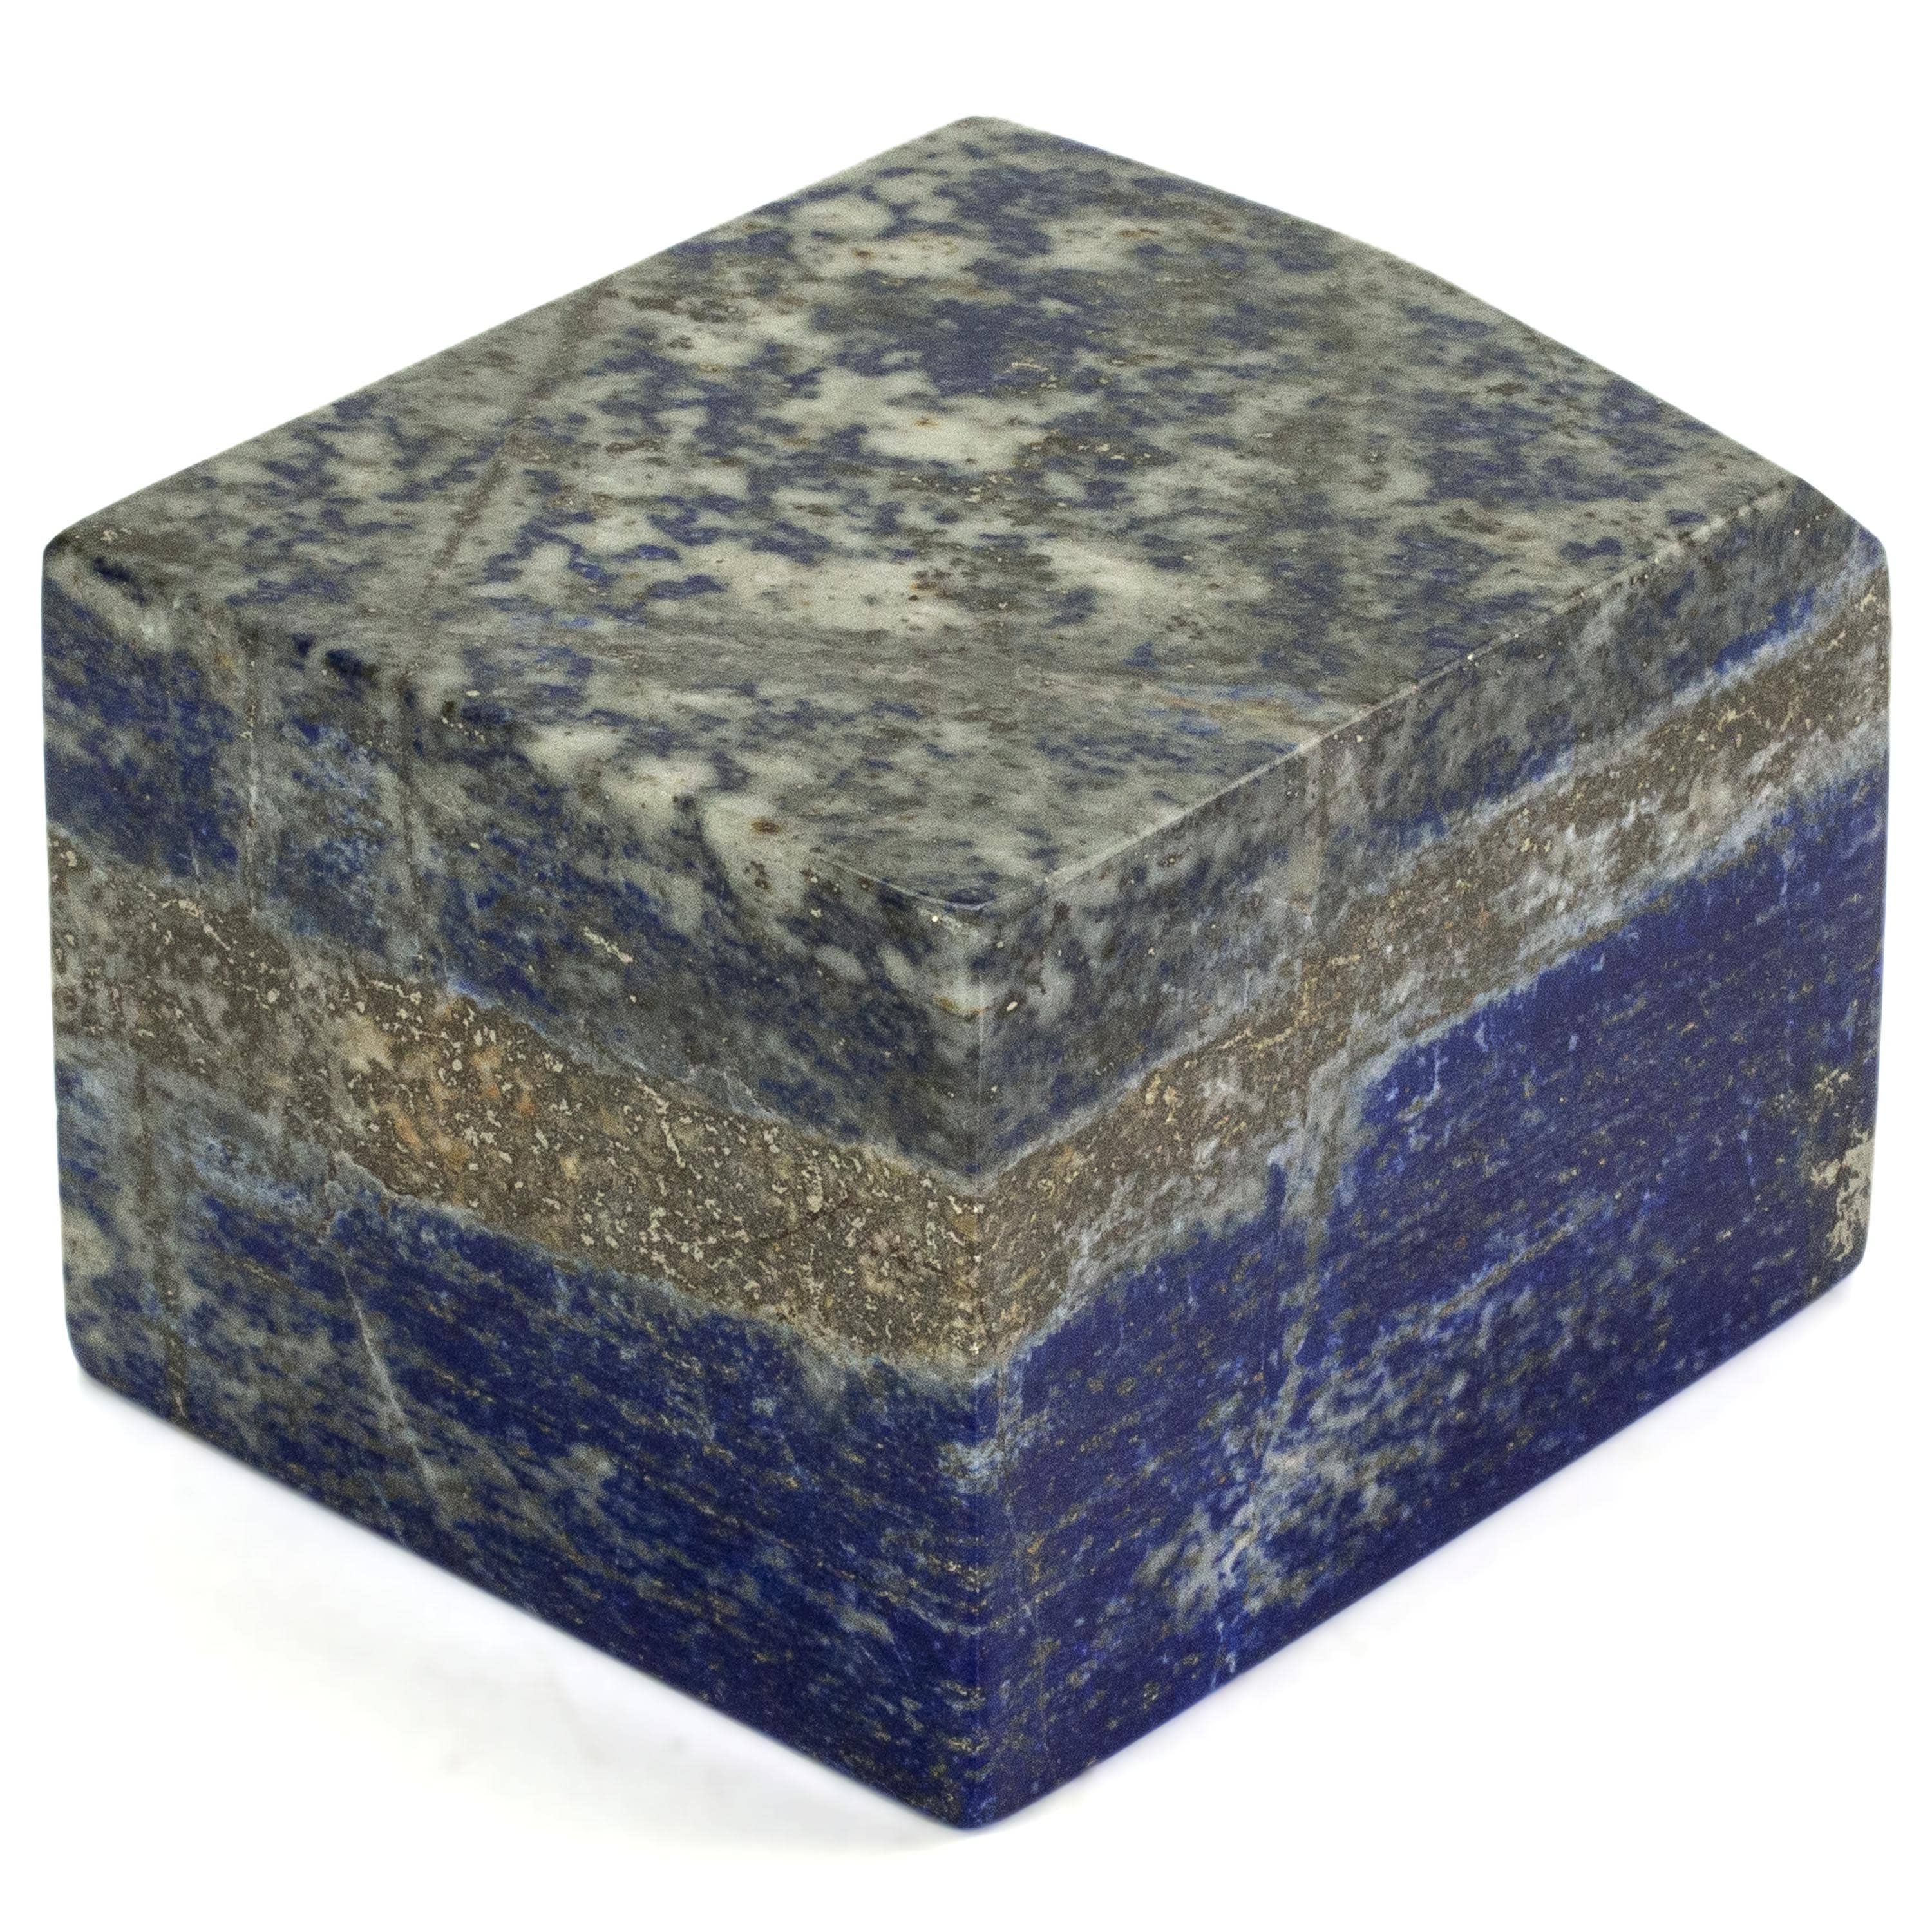 Kalifano Lapis Lapis Lazuil Freeform from Afghanistan - 655 g / 1.4 lbs LP700.006